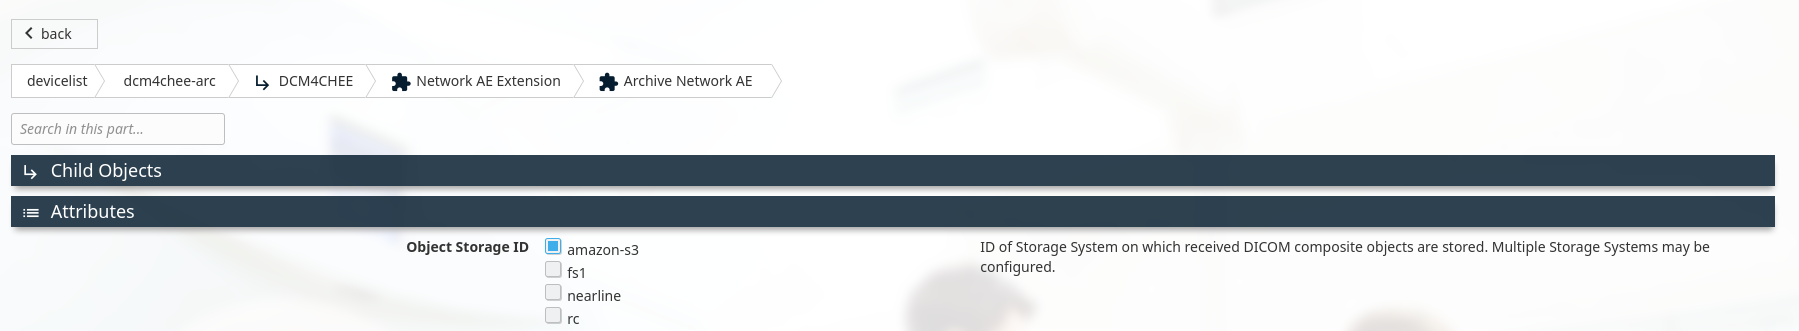 aws-s3-object-storage.png